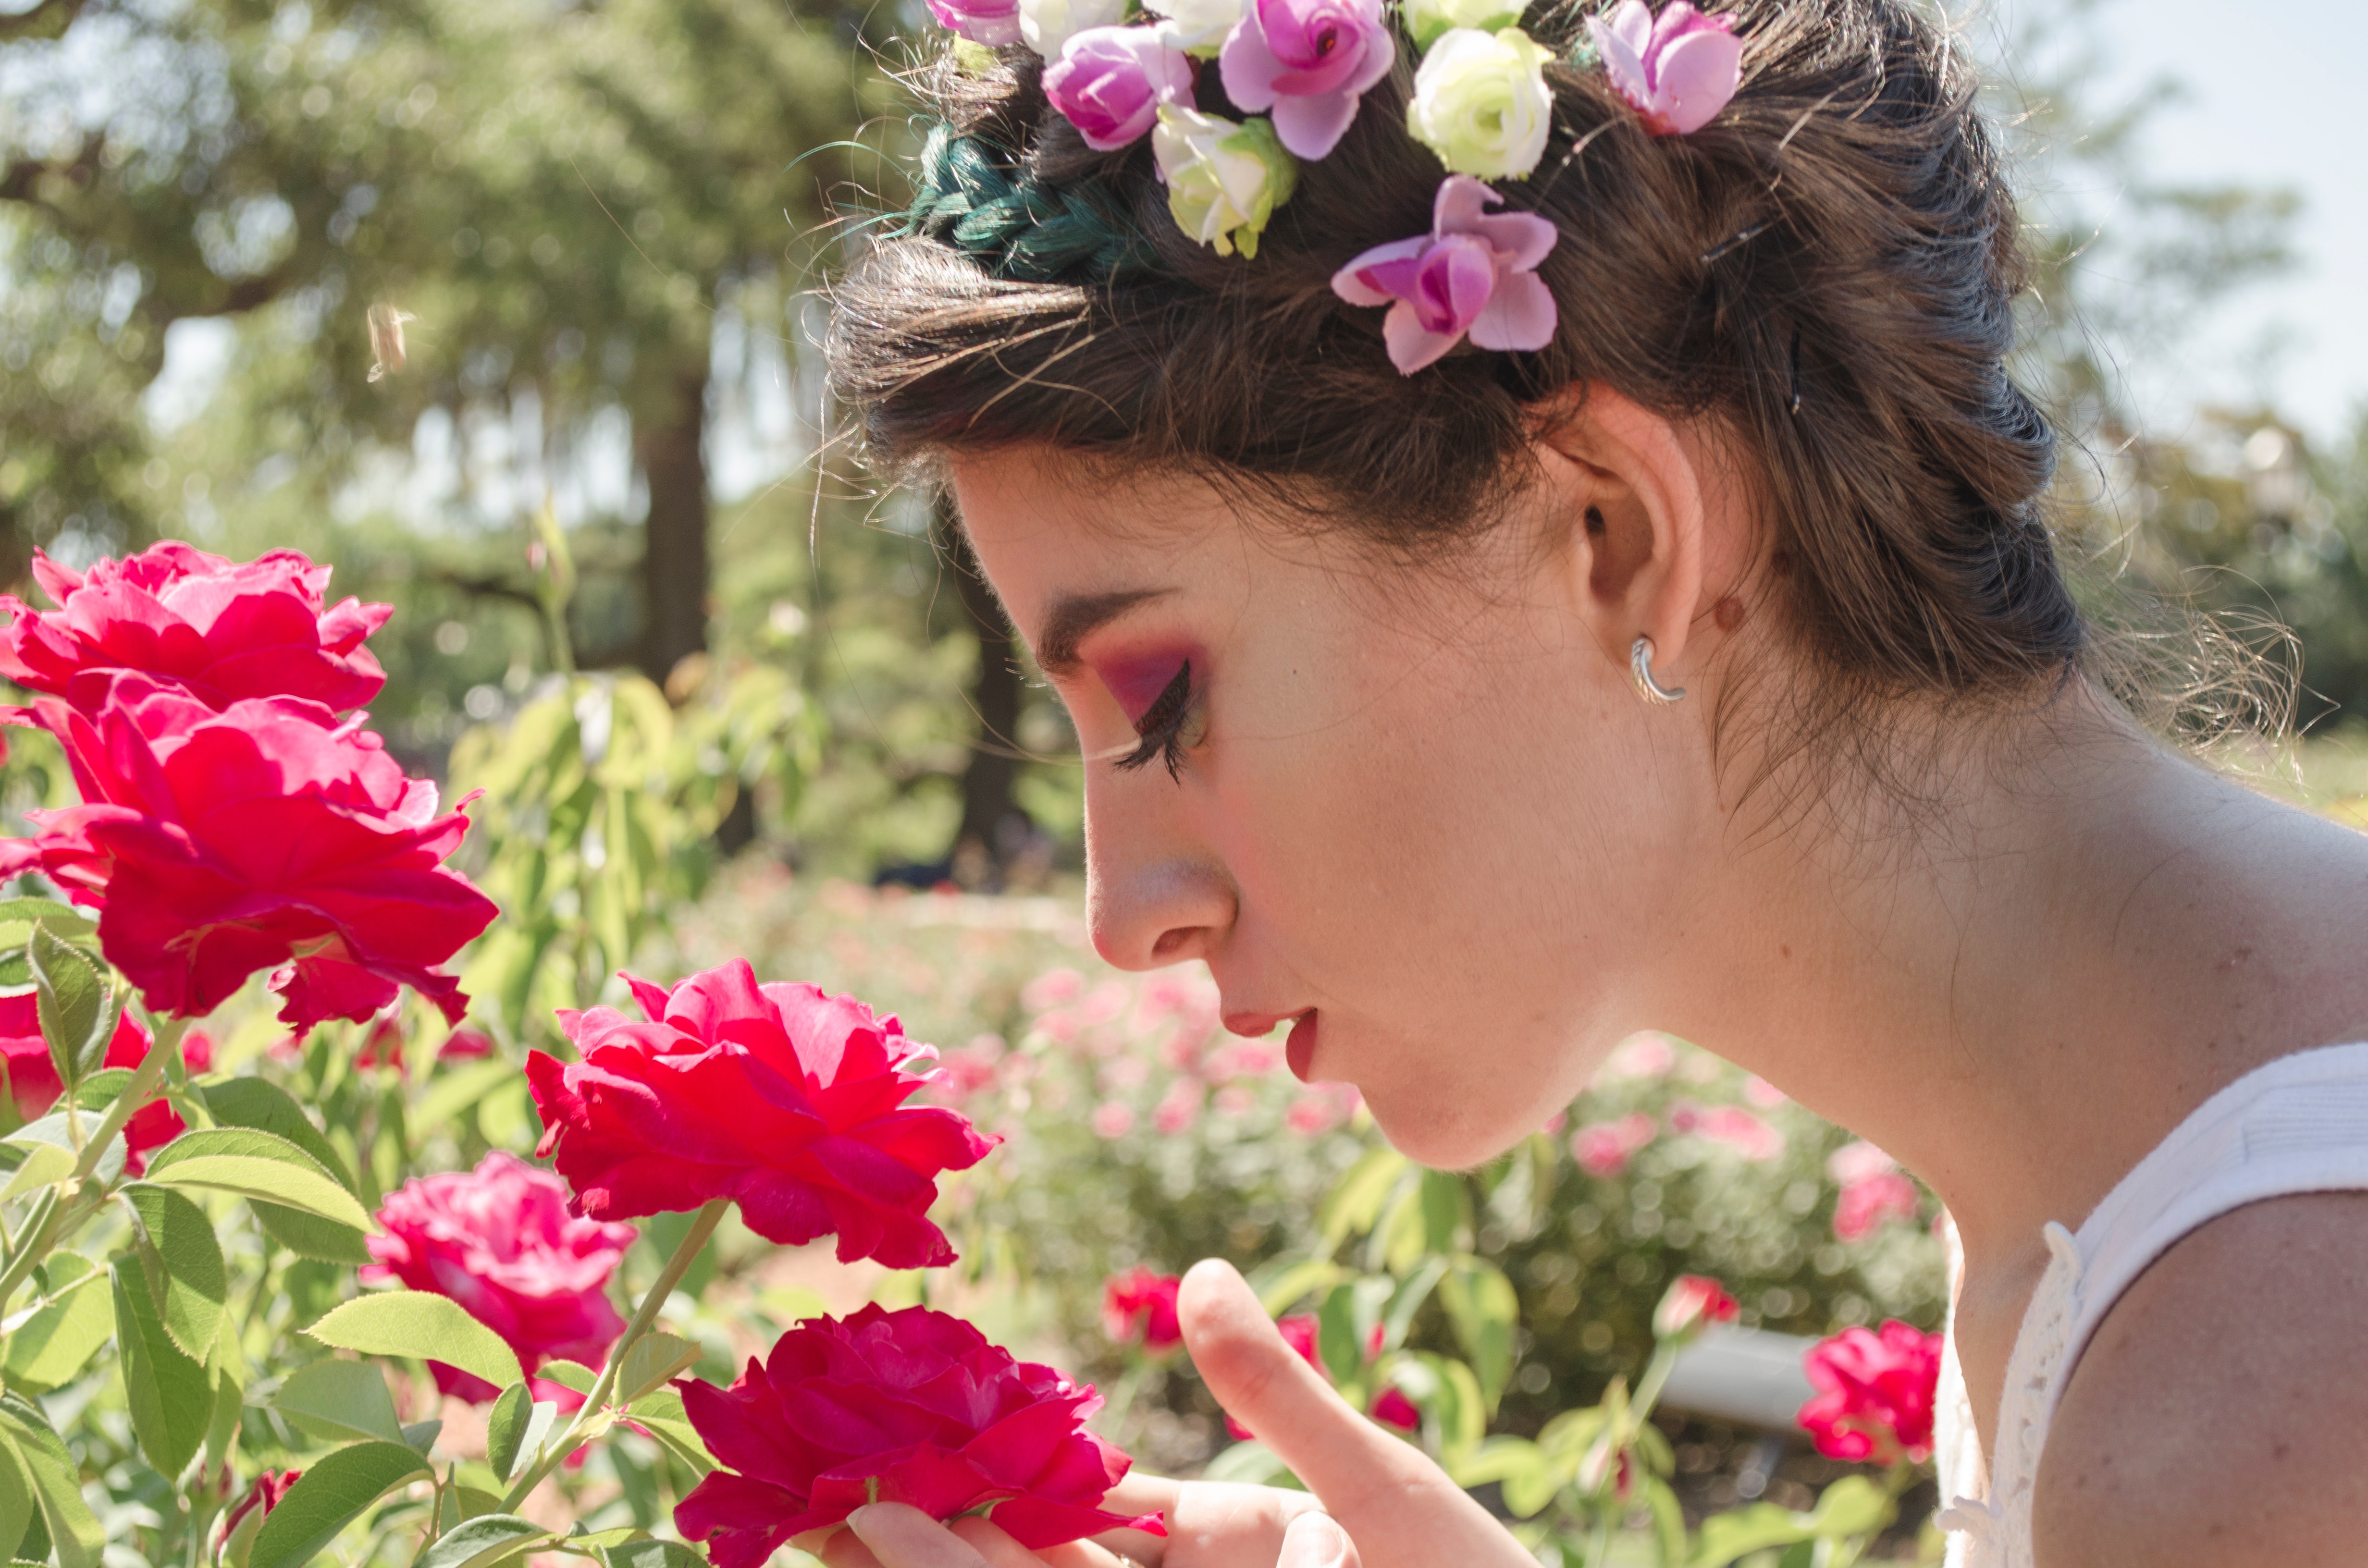 Woman in floral headdress sniffing on red flowers photo